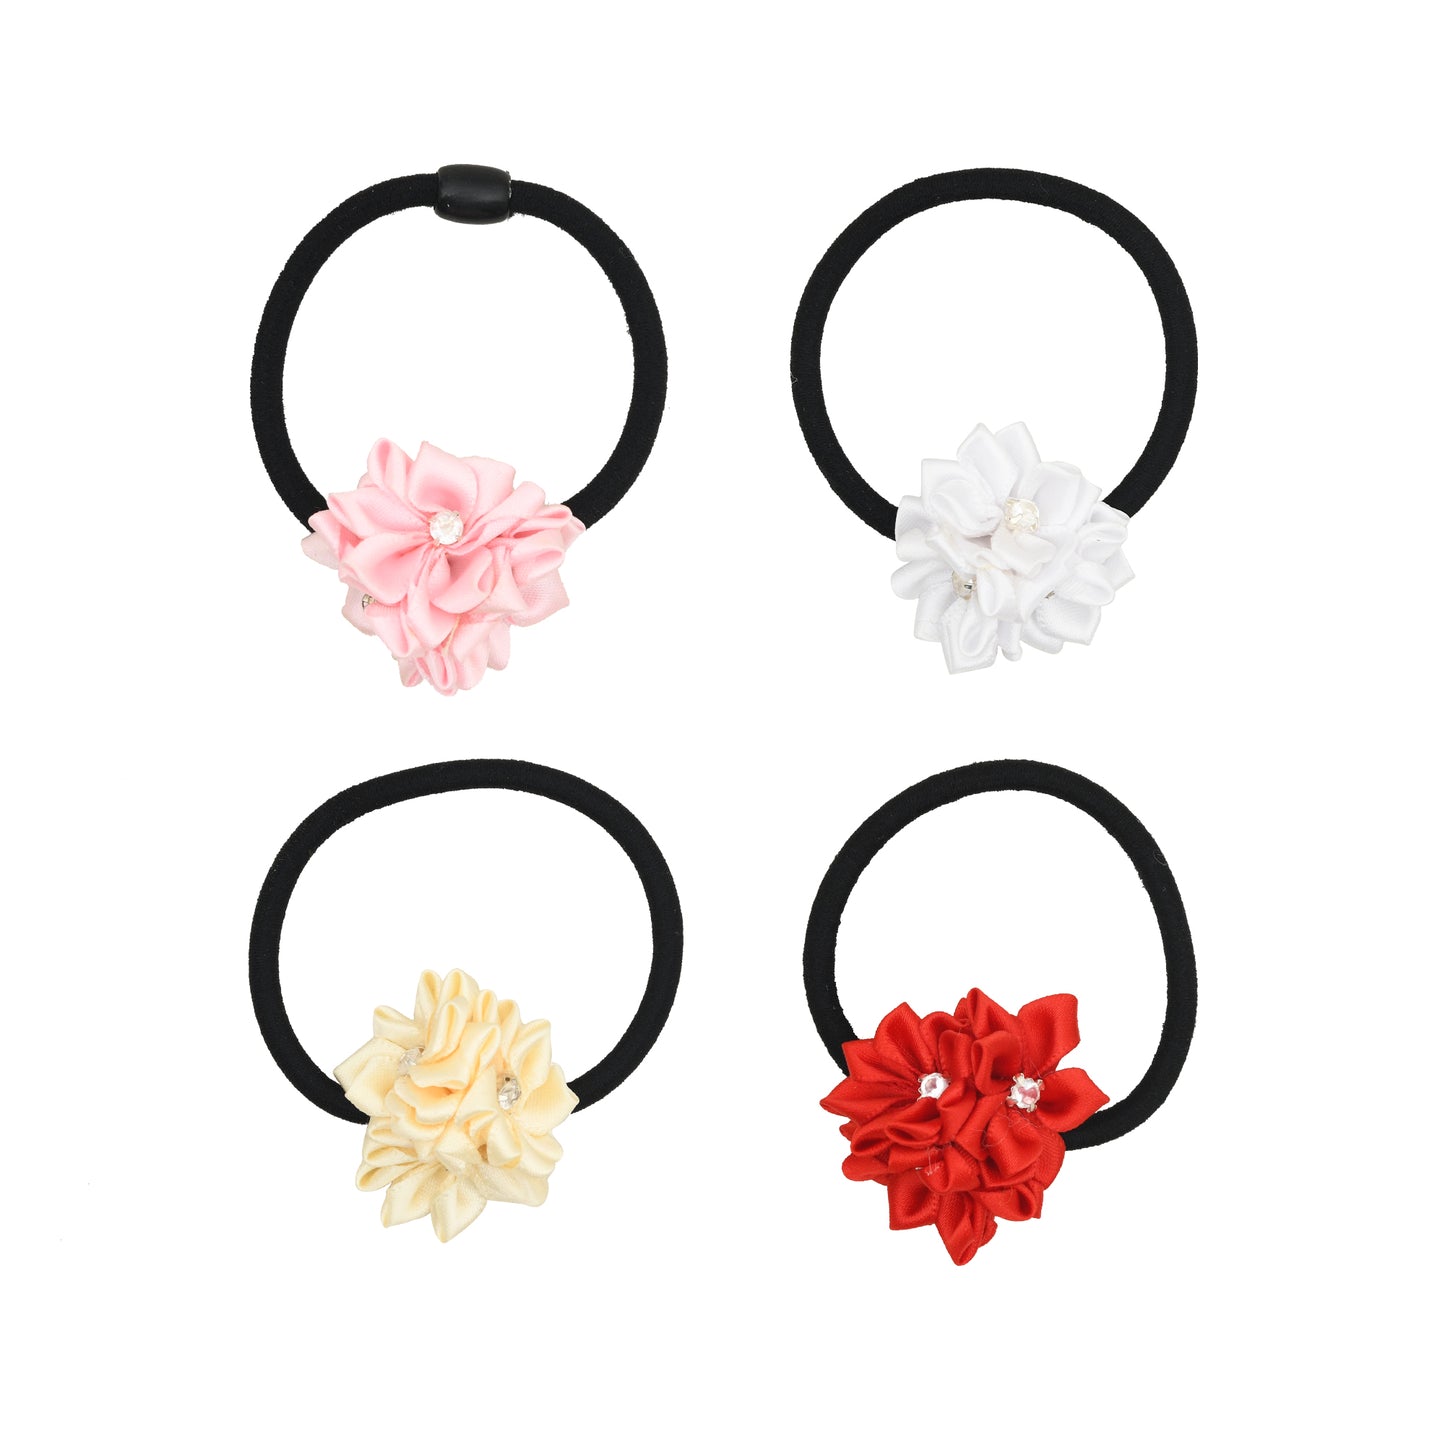 Set of 4 Multicolor Hair Ties for Girls